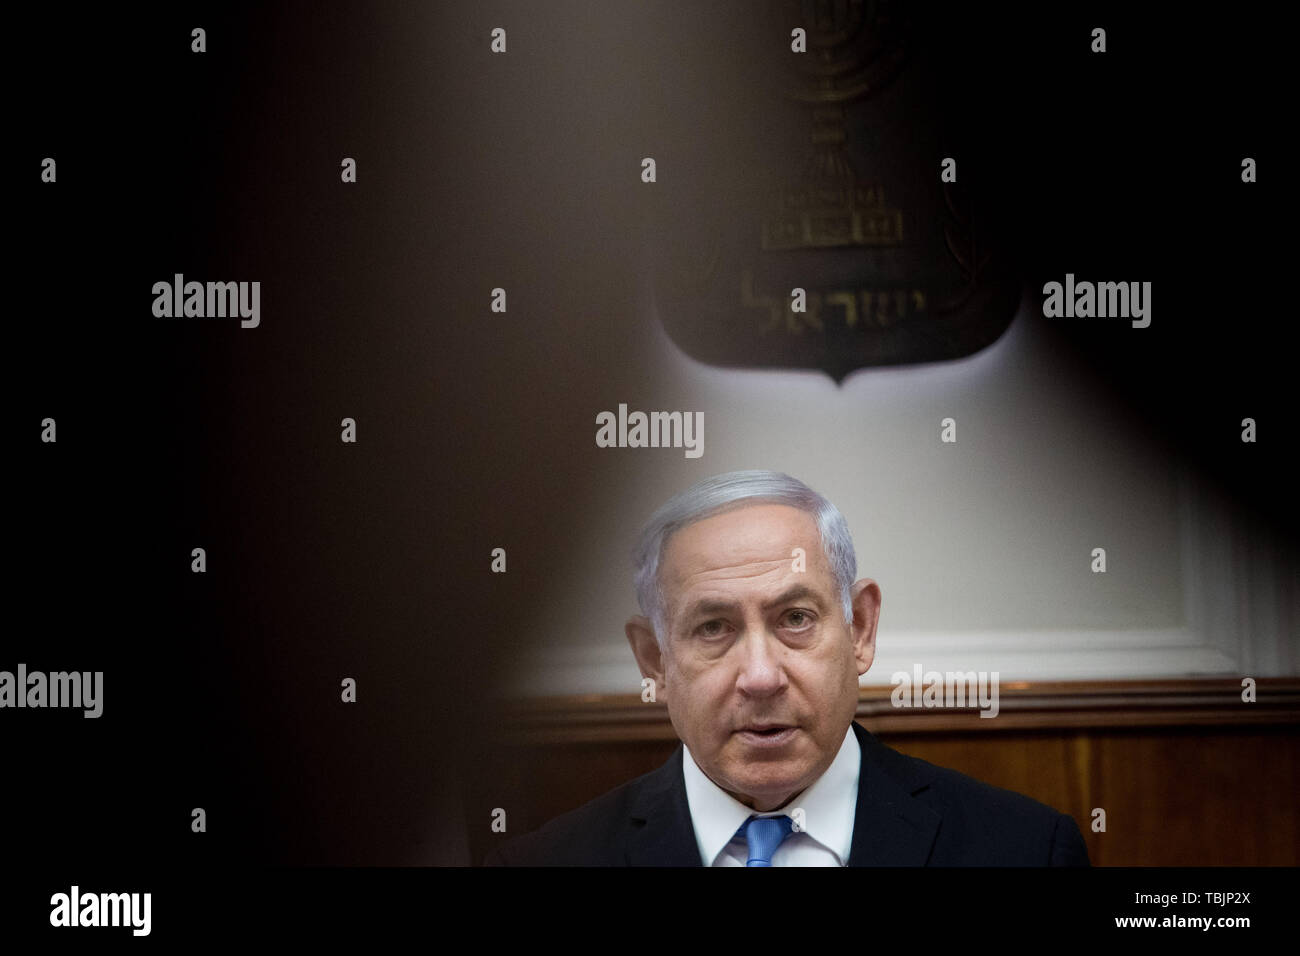 Jerusalem. 2nd June, 2019. Israeli Prime Minister Benjamin Netanyahu attends the weekly cabinet meeting in Jerusalem, June 2, 2019. The Israeli parliament, known as the Knesset, dissolved itself last Wednesday and scheduled another general election for mid-September of this year. The development came after Israeli Prime Minister Benjamin Netanyahu failed to form a coalition government. Credit: JINI/Yonatan Sindel/Xinhua/Alamy Live News Stock Photo